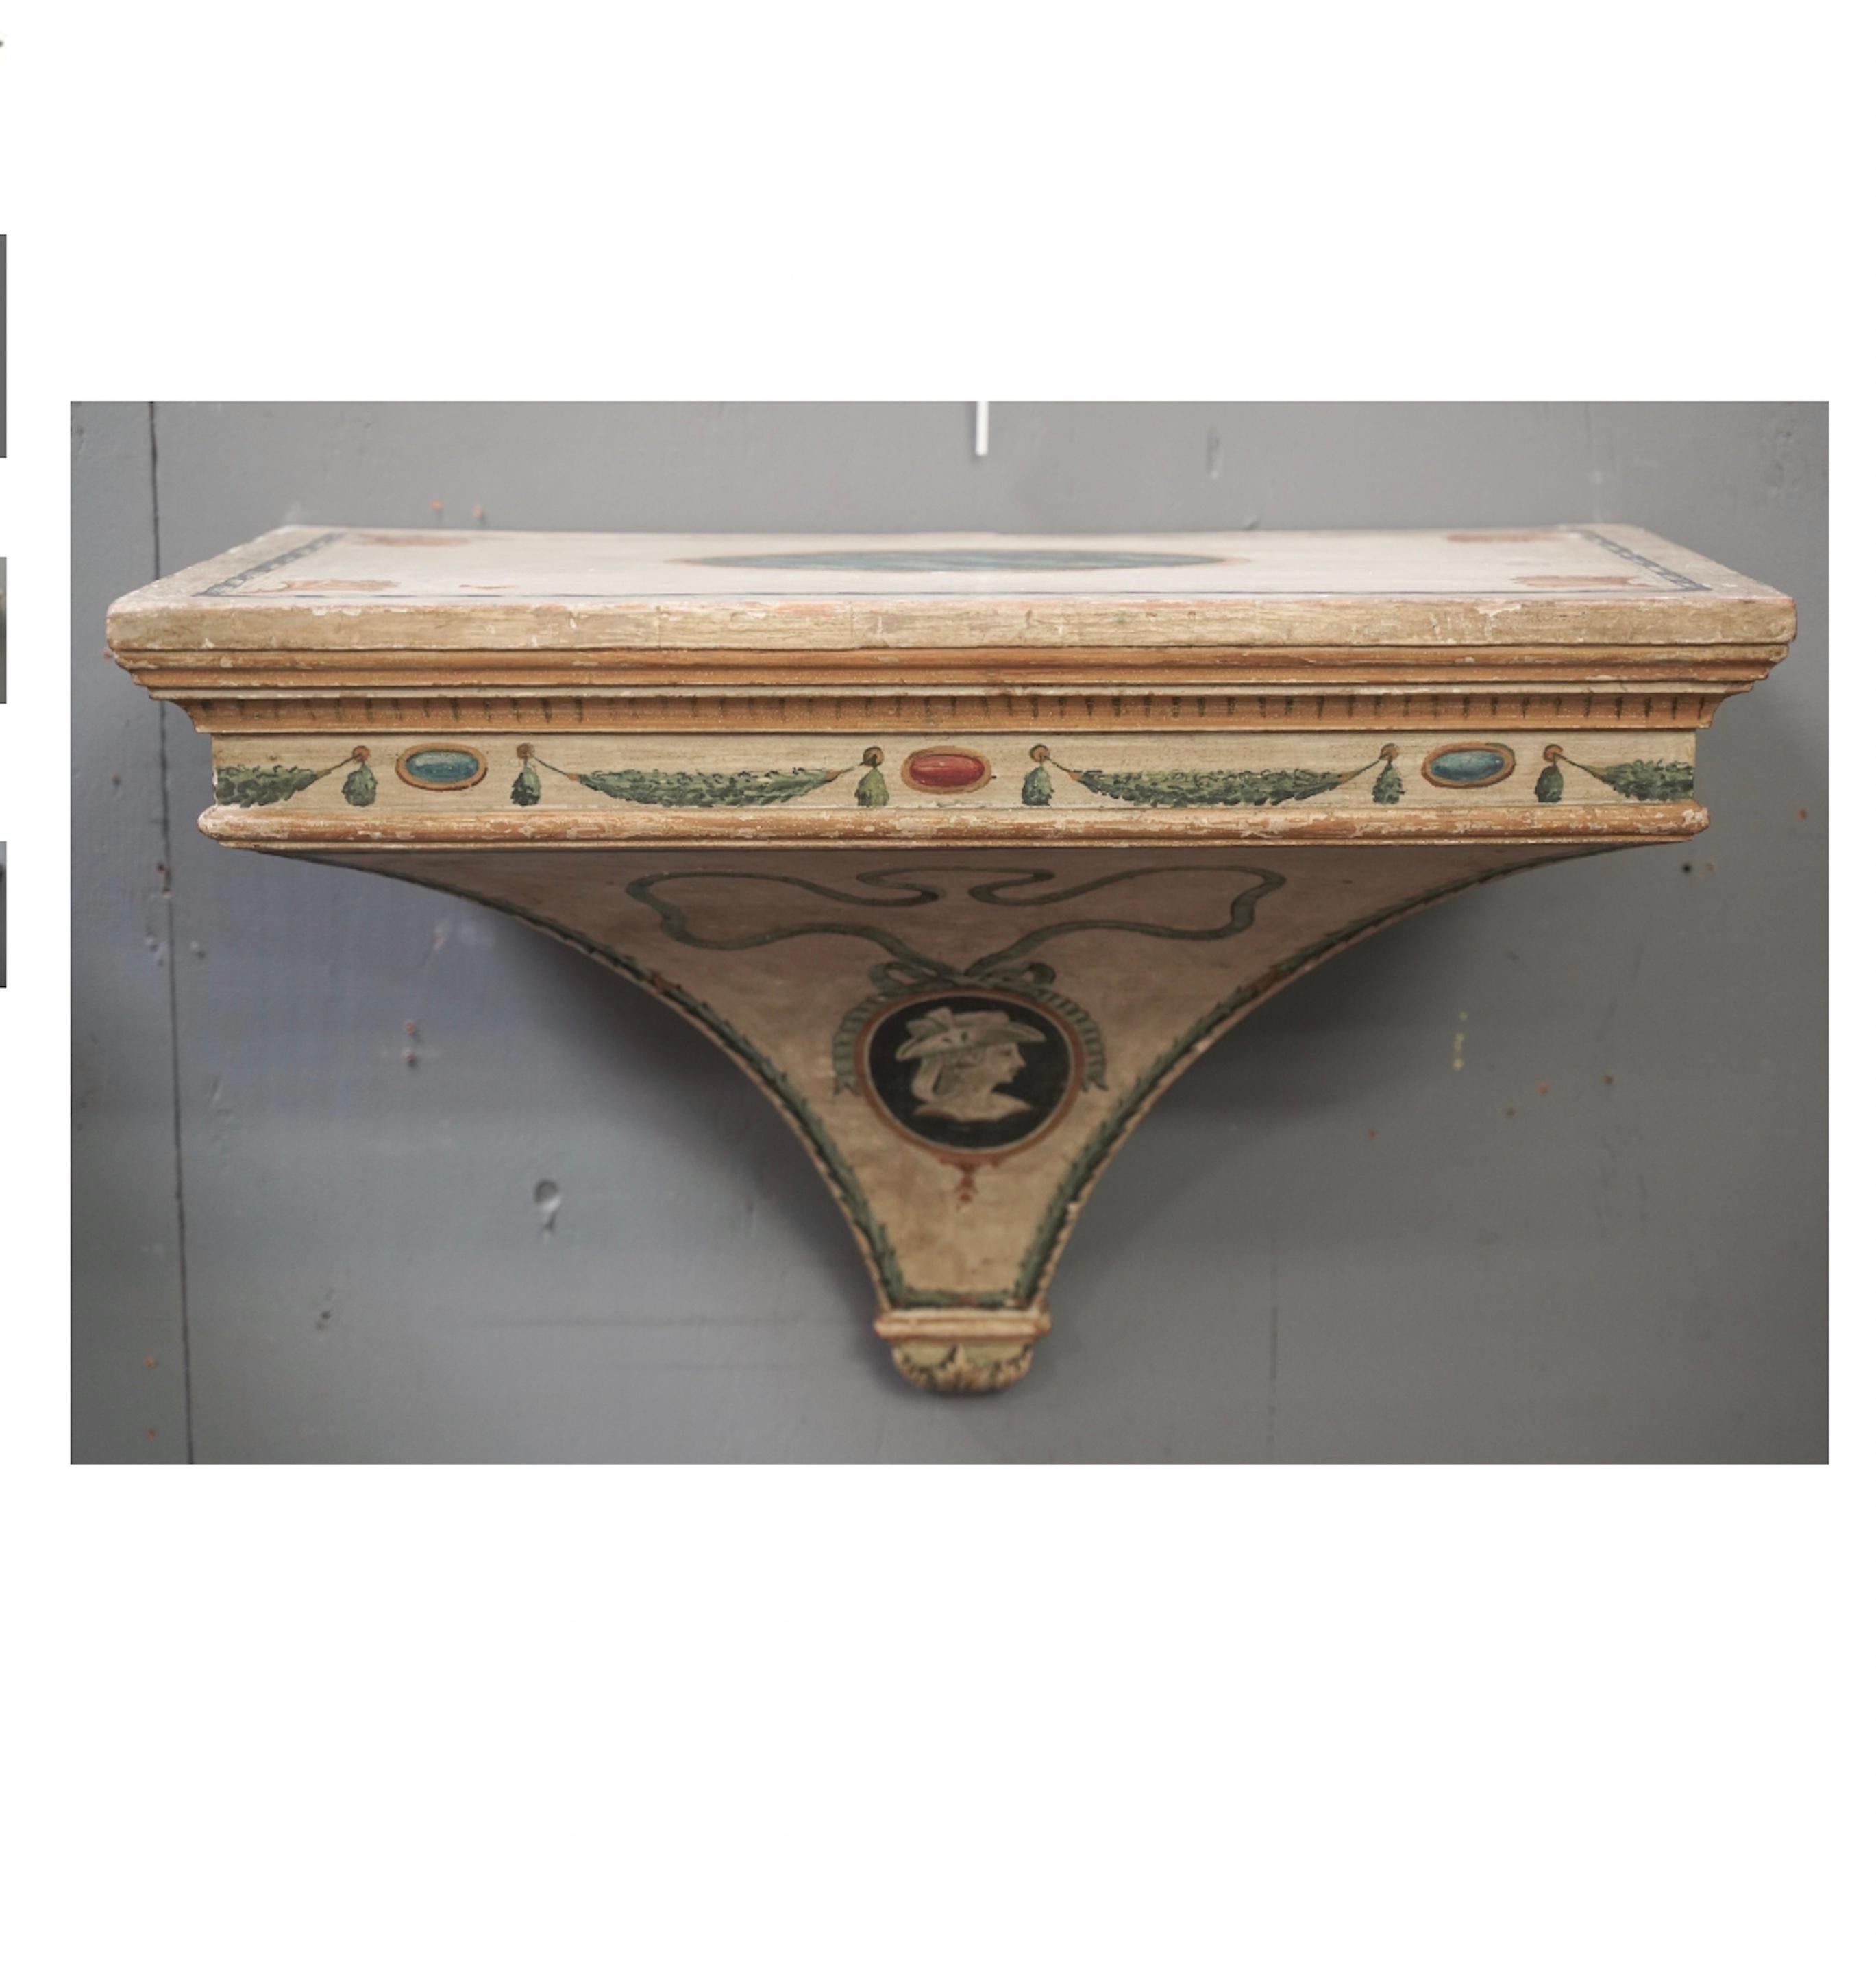 Pair of Venetian, hand painted wooden wall brackets decorated with swags, trompe-l'oeil dentils,  left and right facing portrait medallions, and ribbons.  